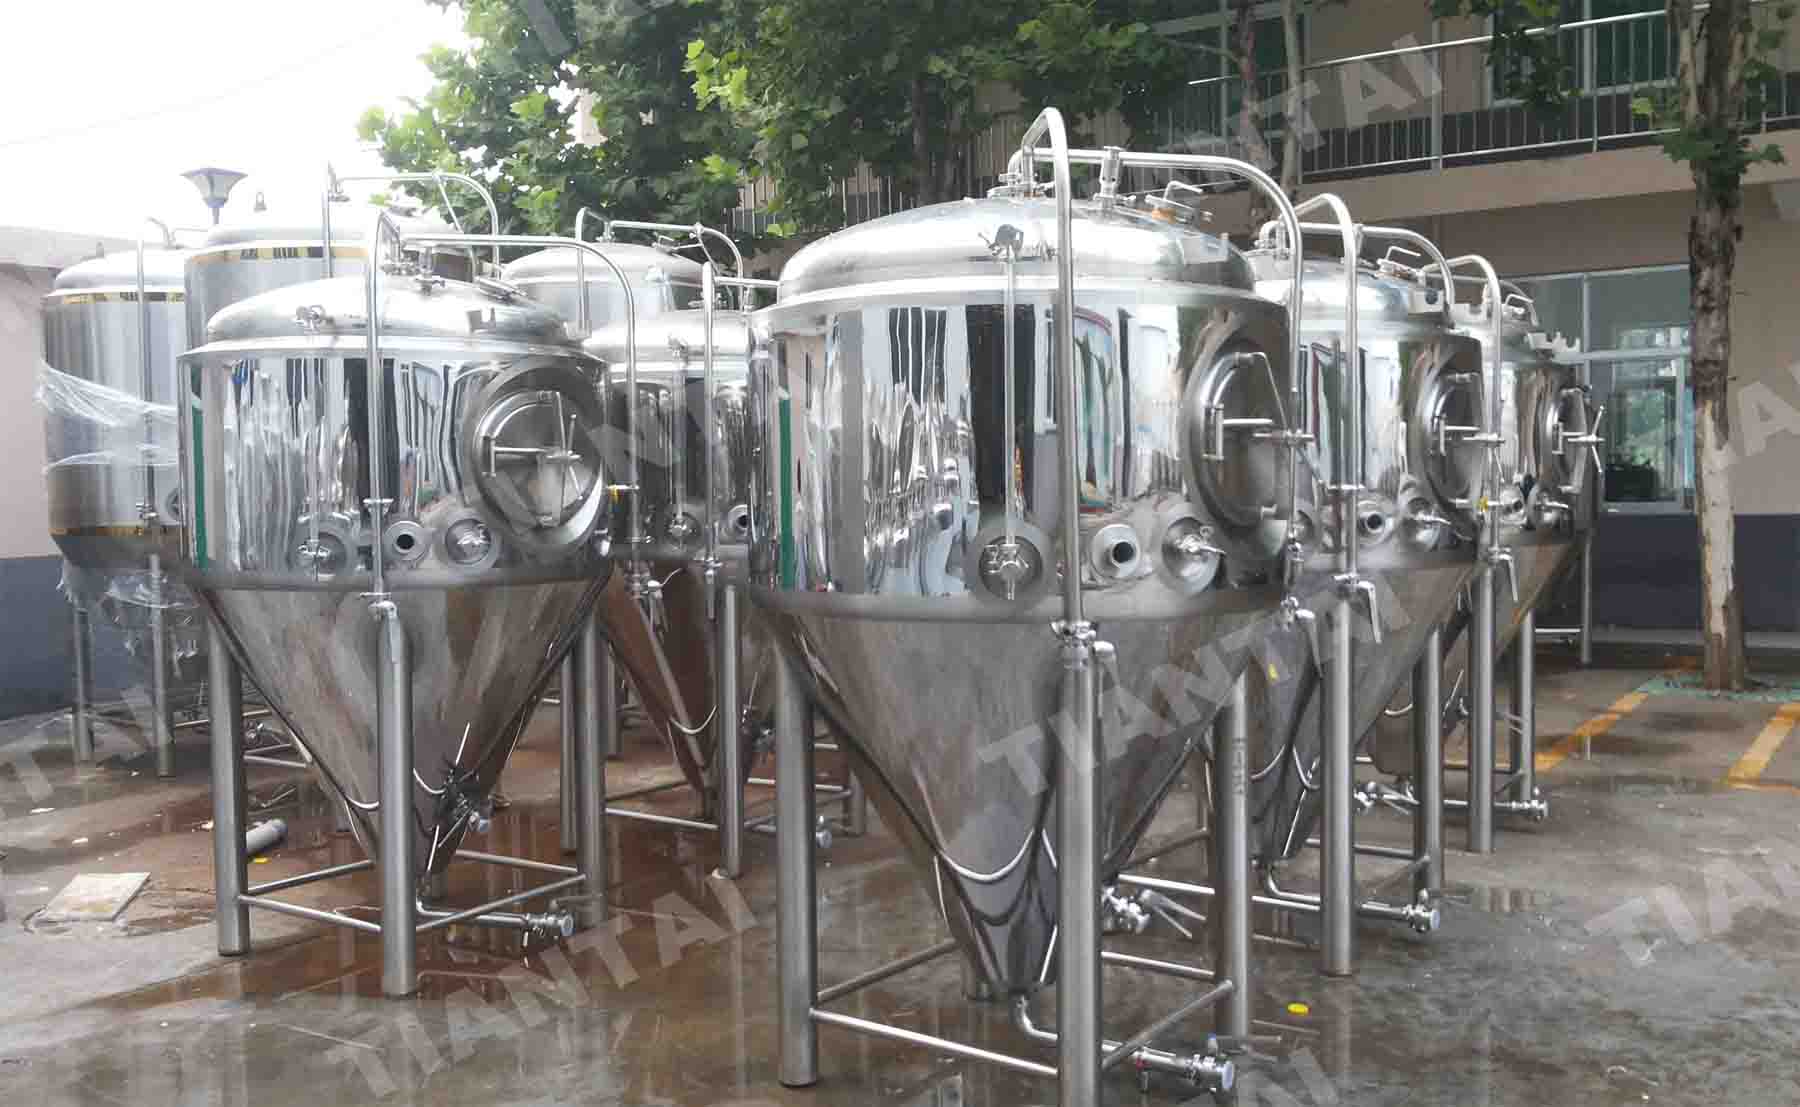 MIrror stainless steel jacketed fermenter